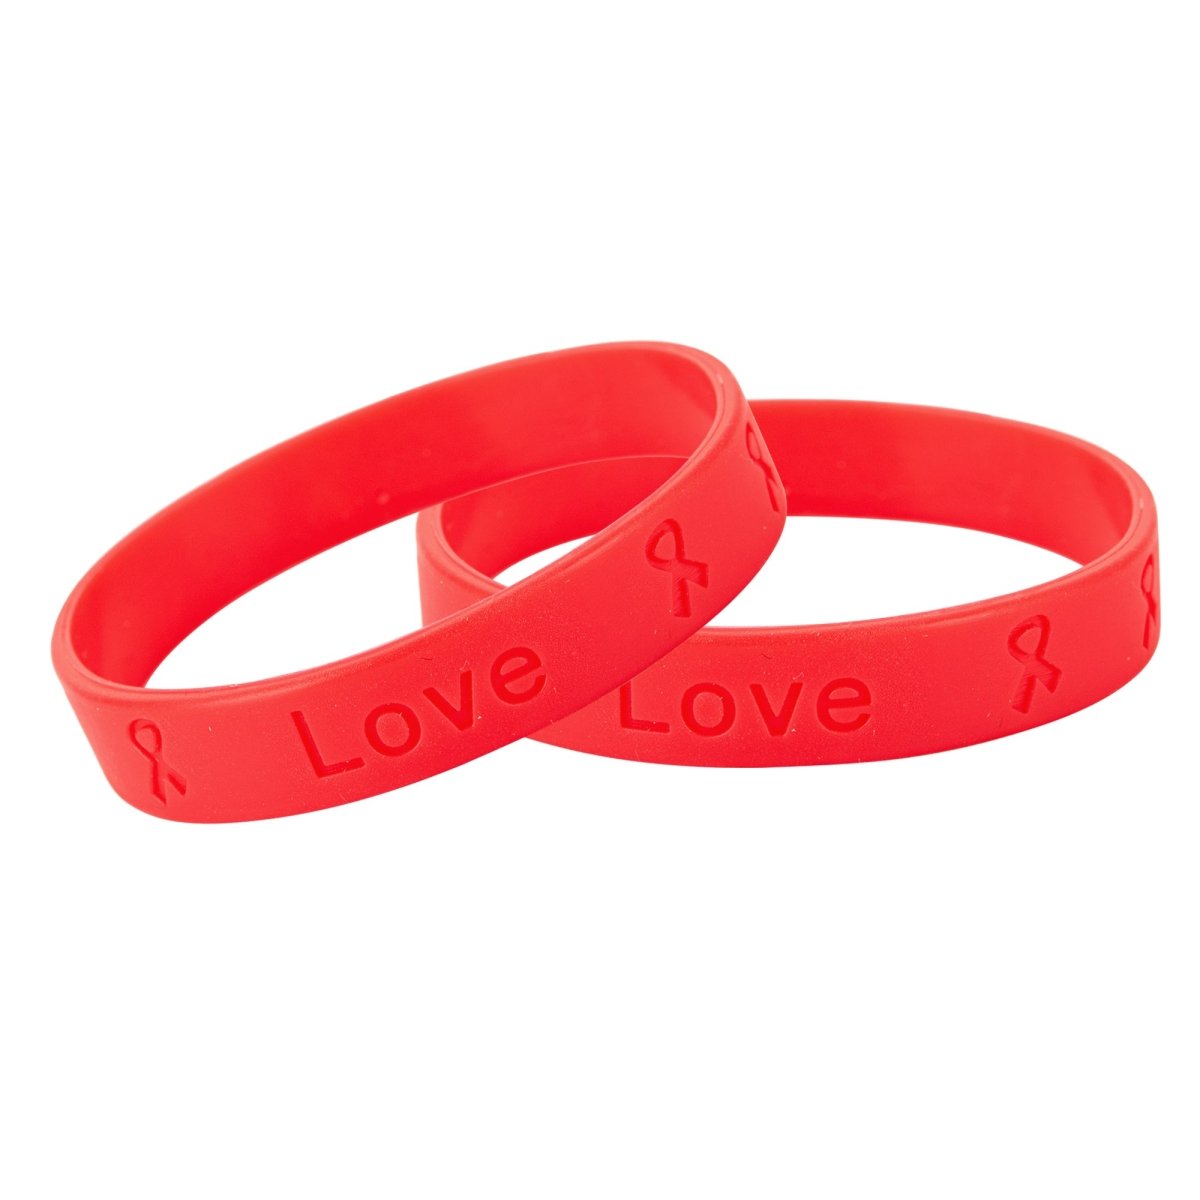 Drug & Alcohol Prevention Awareness Red Silicone Bracelet Wristbands - Fundraising For A Cause